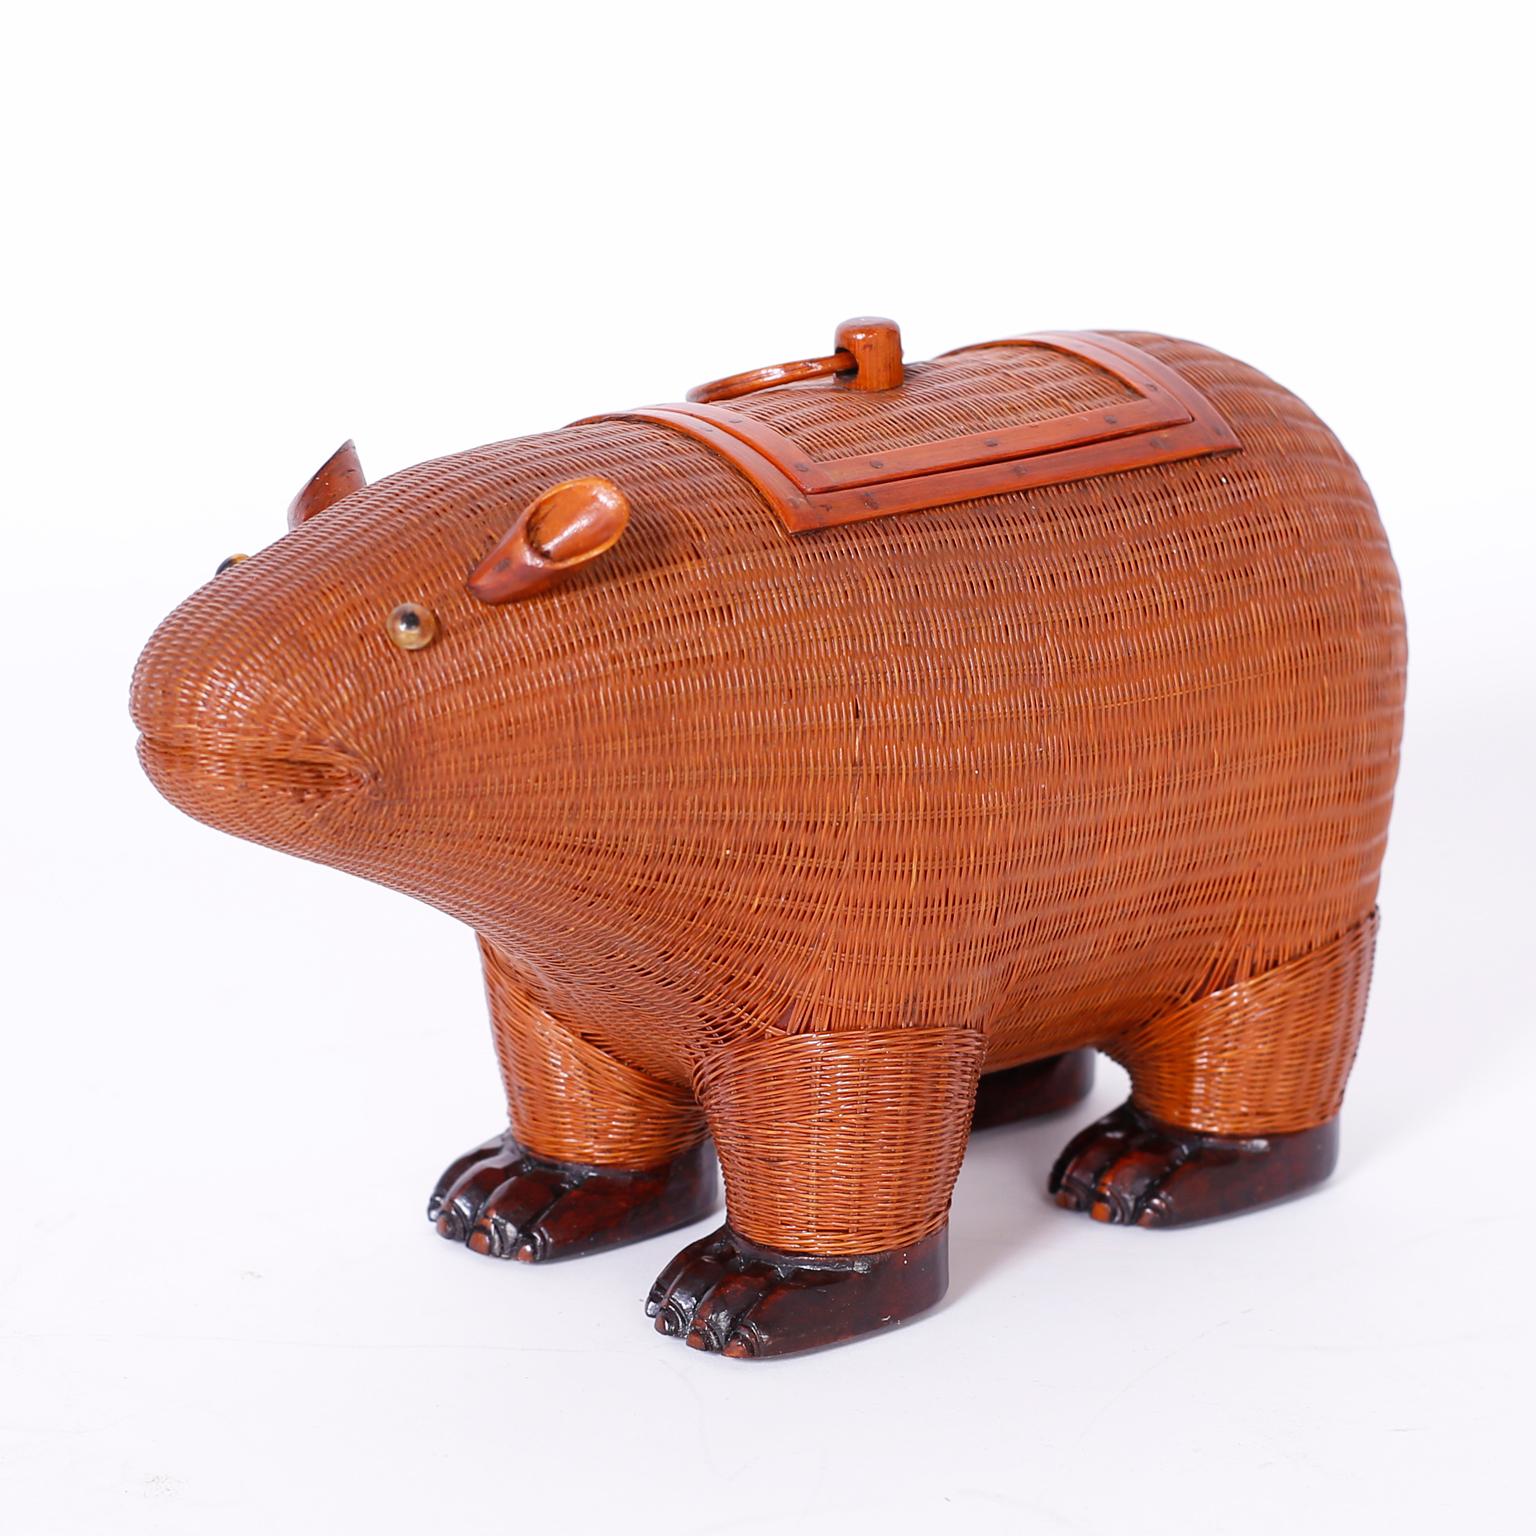 Chinese wicker capybara box from the Shanghai collection with carved wood highlights and removable lid.